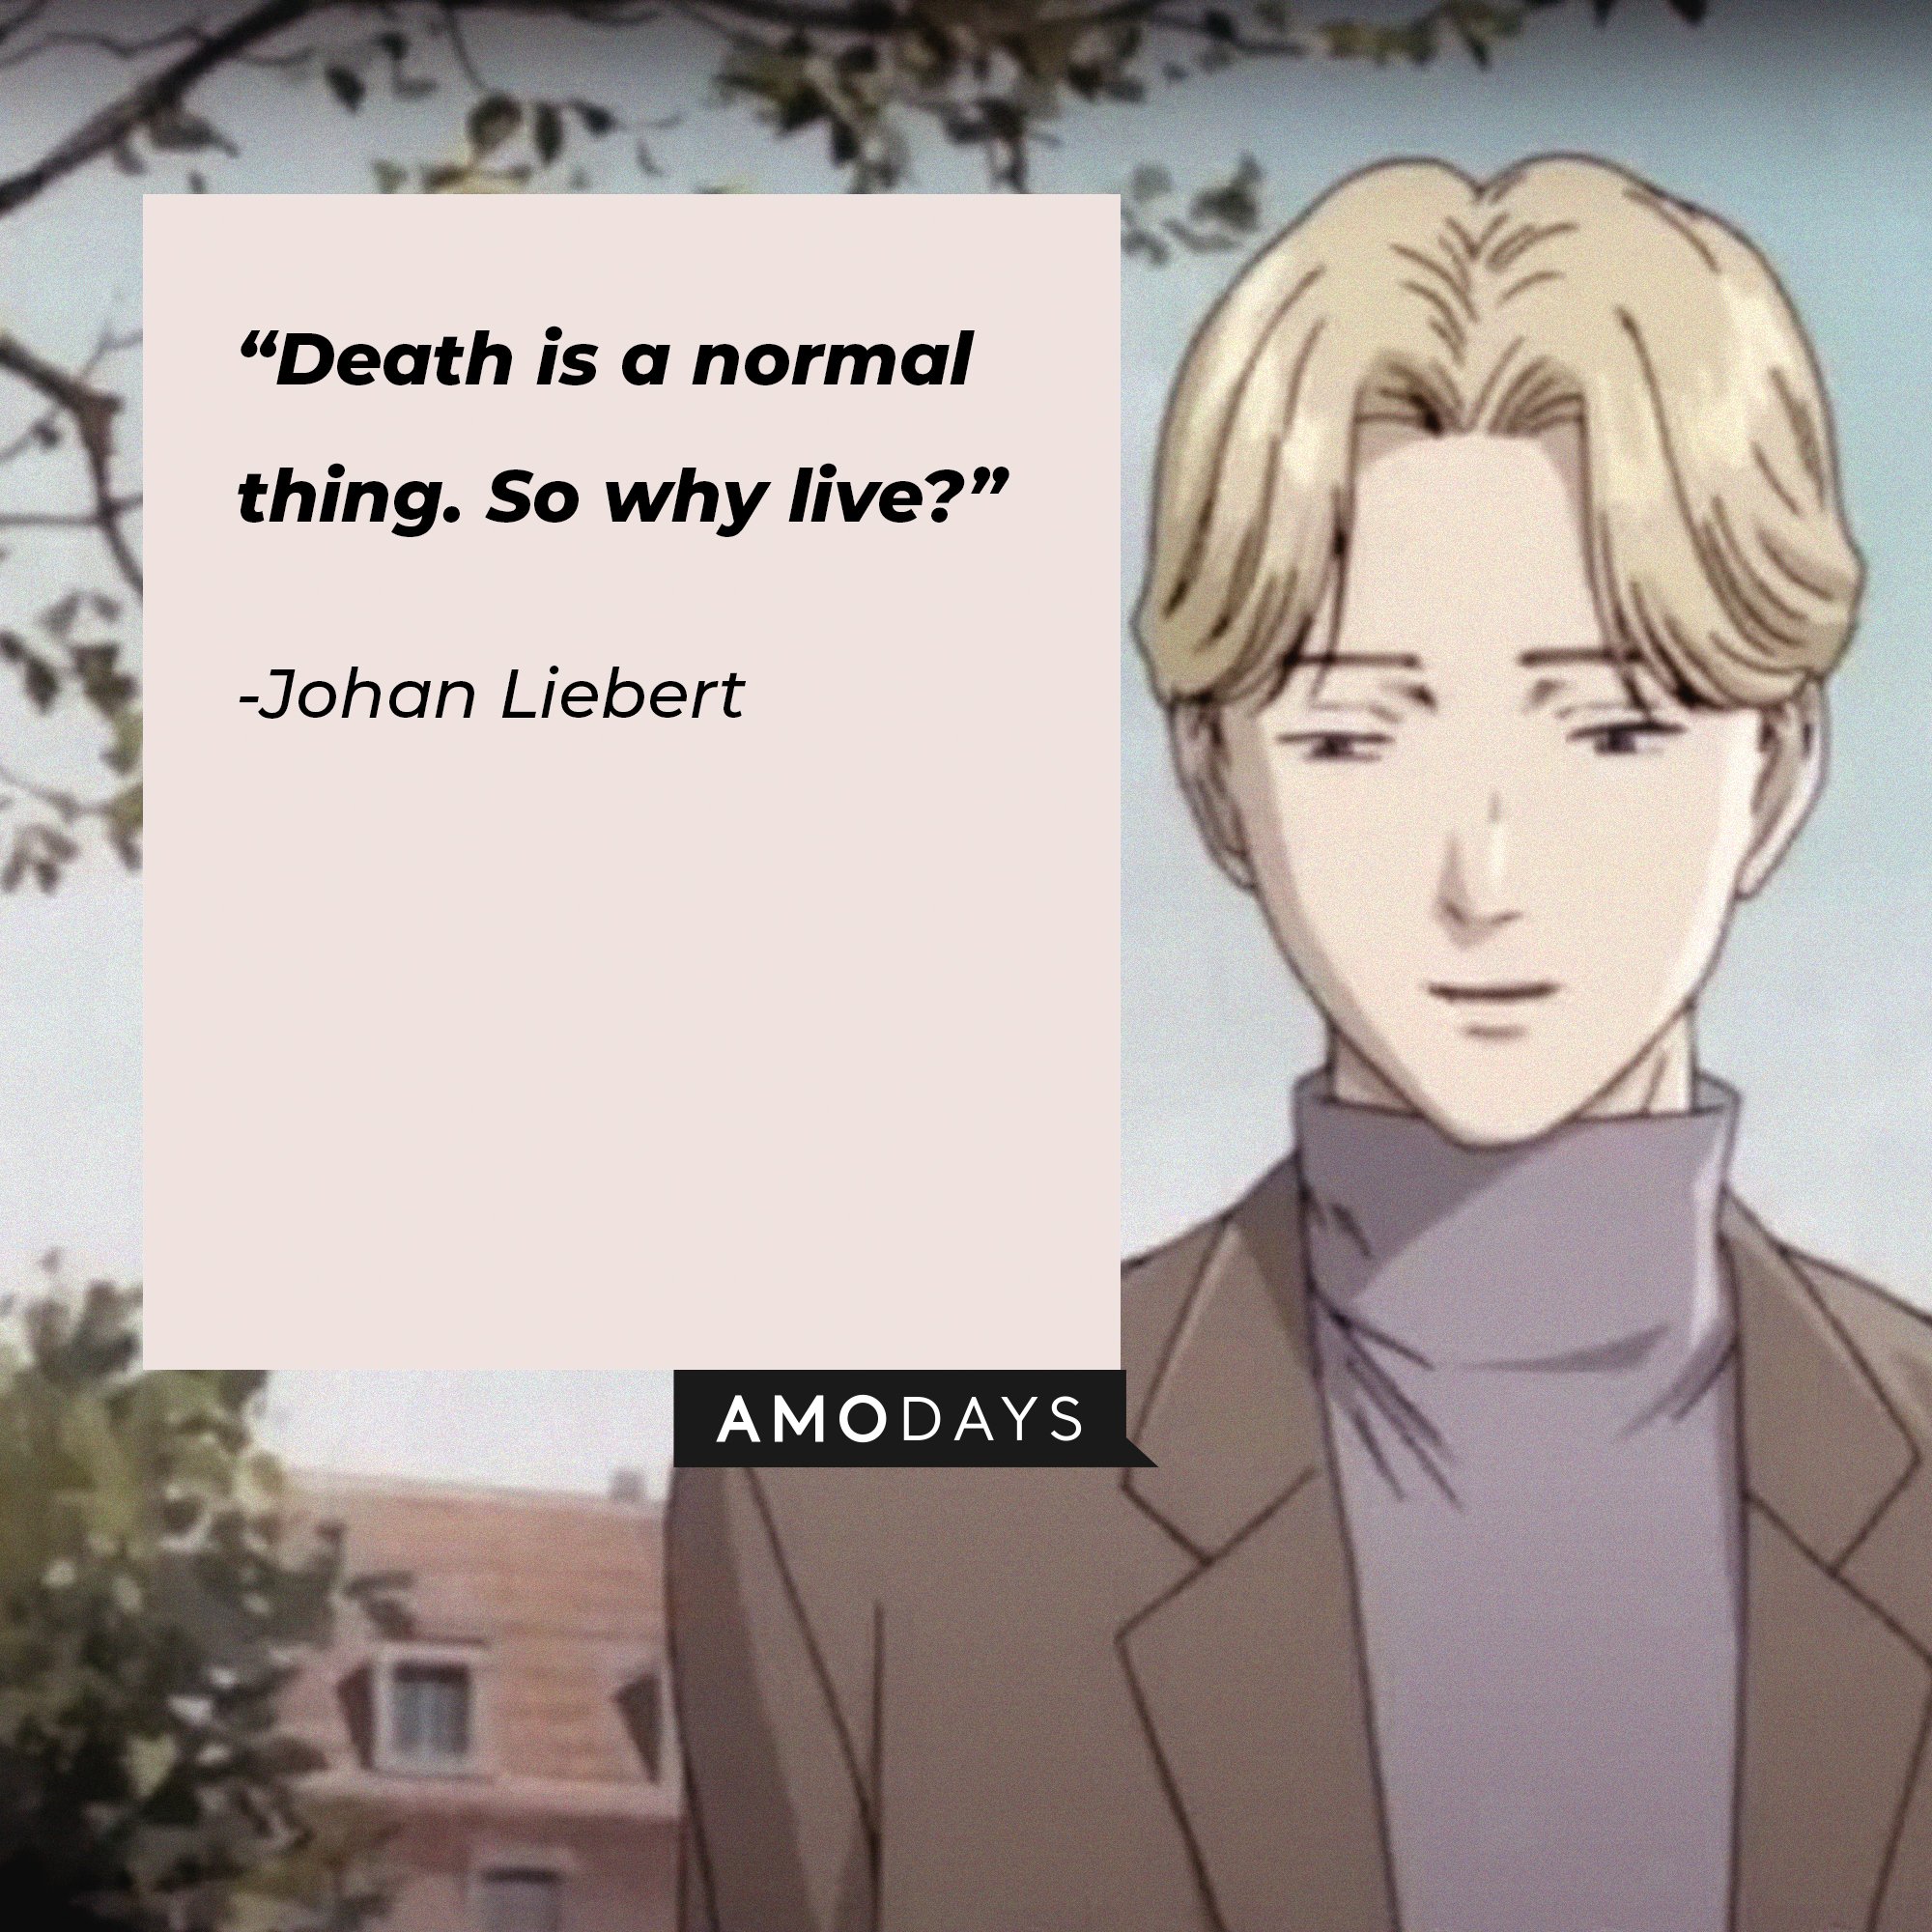 Johan Liebert’s quote: “Death is a normal thing. So why live?” | Image: AmoDays